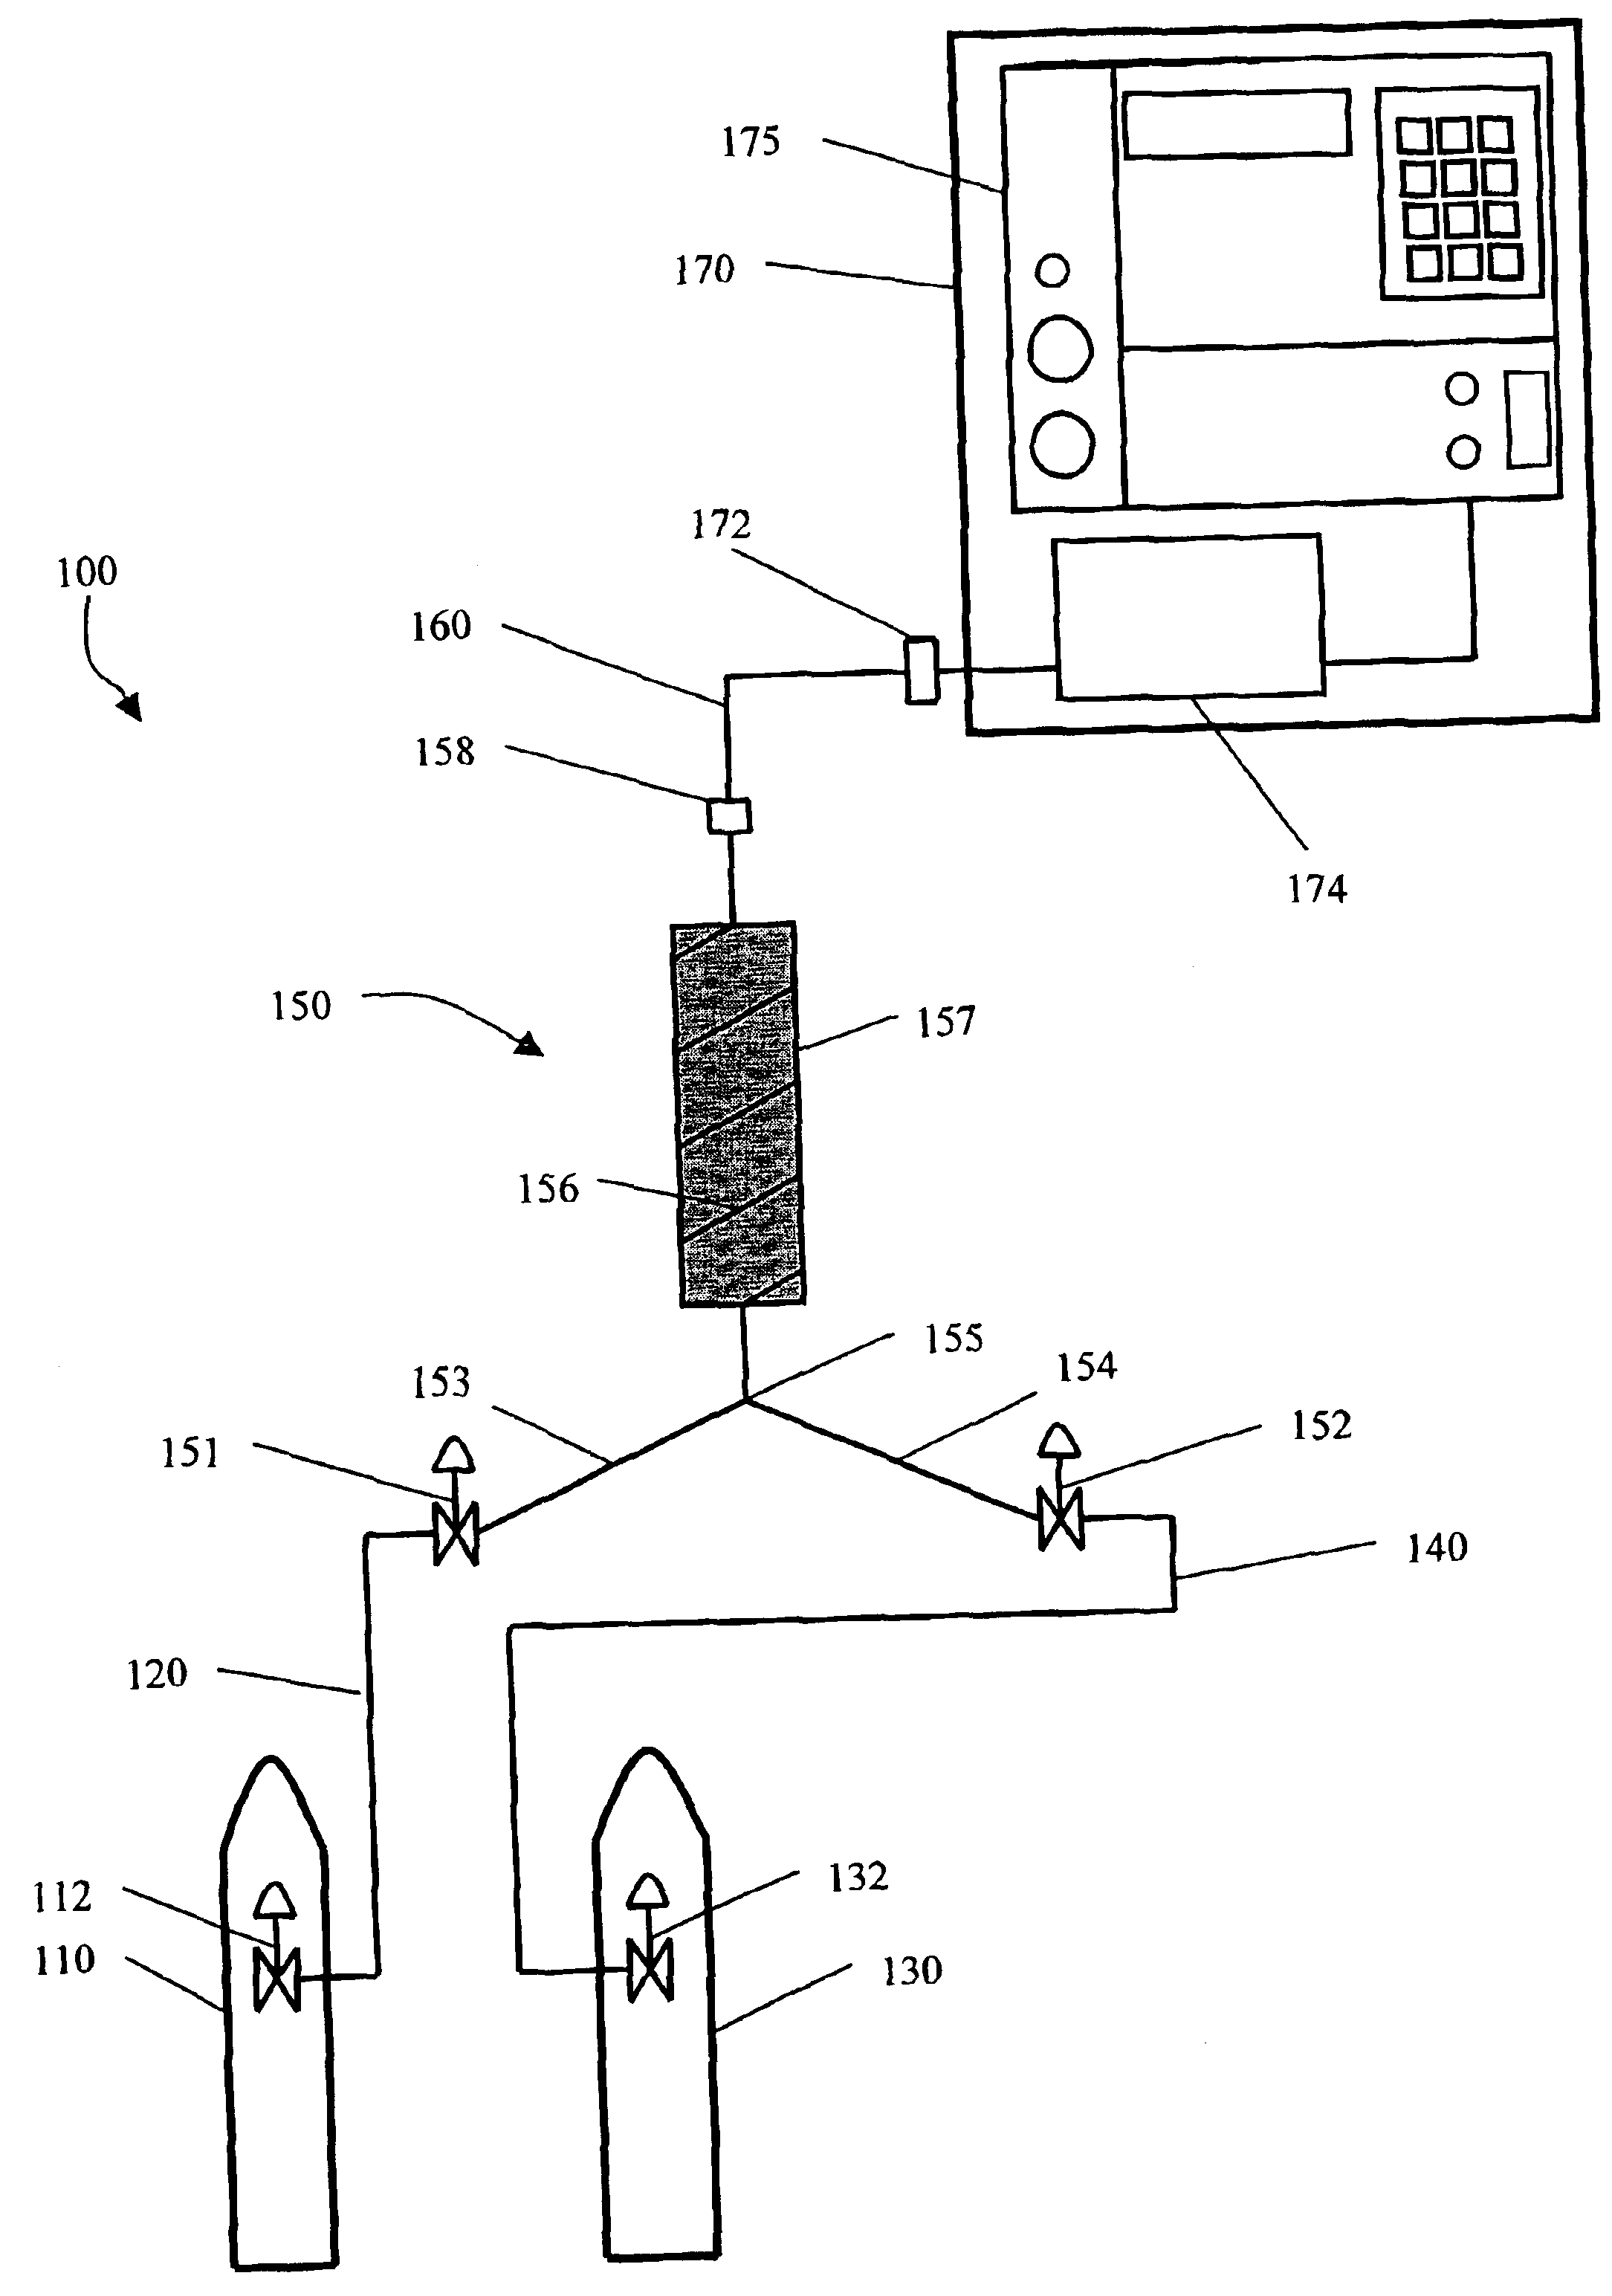 Method and system for creating a mercury halide standard for use in testing a mercury analyzer system